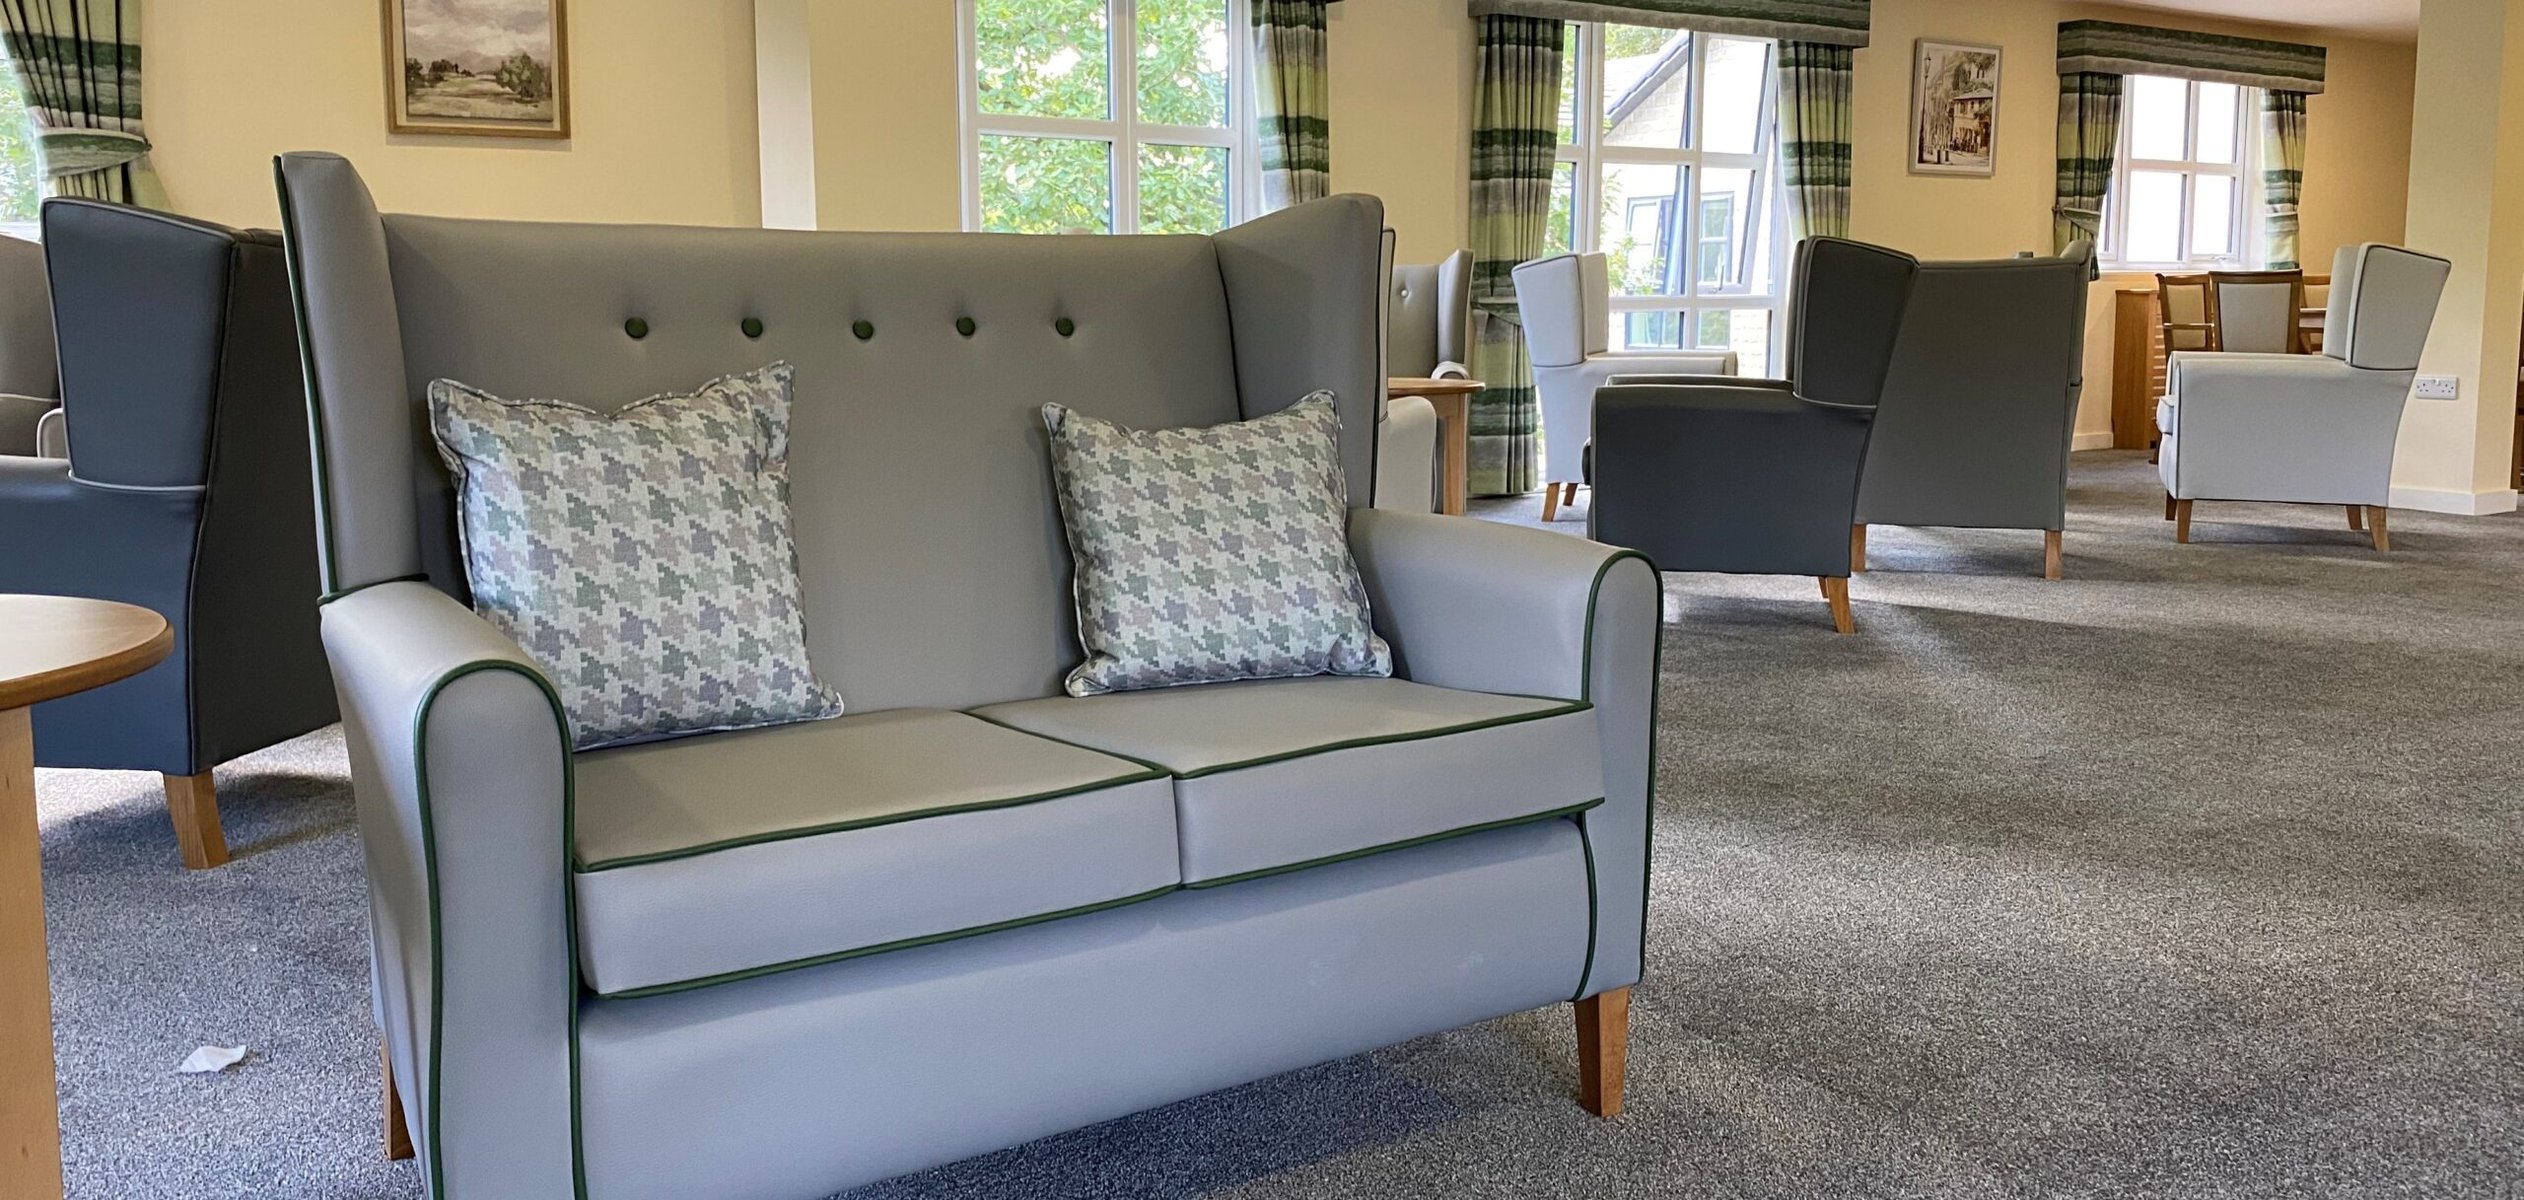 Crafting Comfort: The Significance of Care Home Furniture